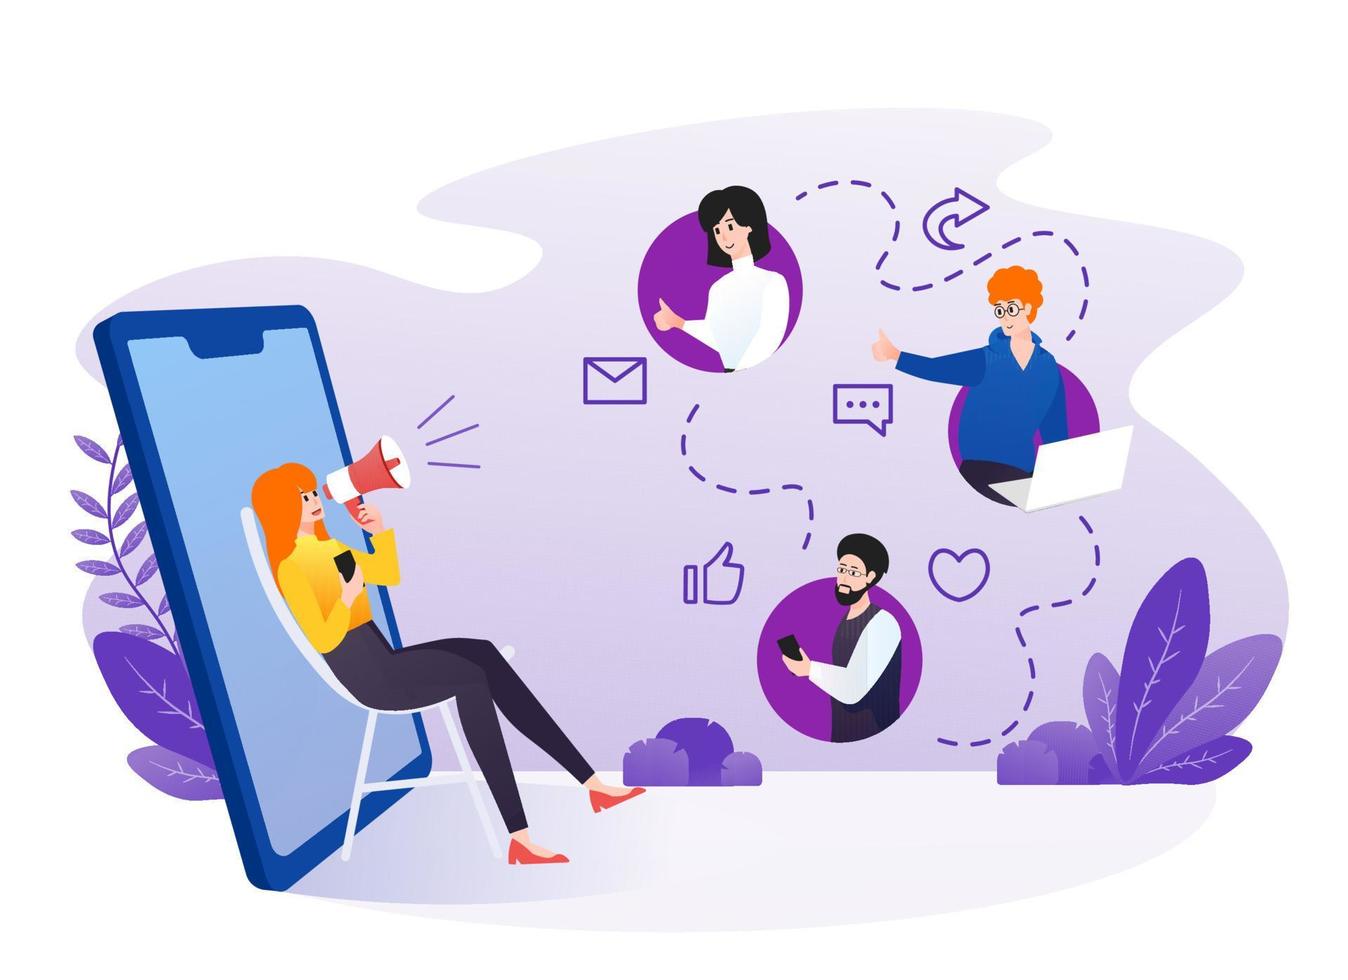 Woman Referring friends with smartphone illustration. Referral marketing, affiliate marketing, network marketing, business partnership, referral program strategy vector